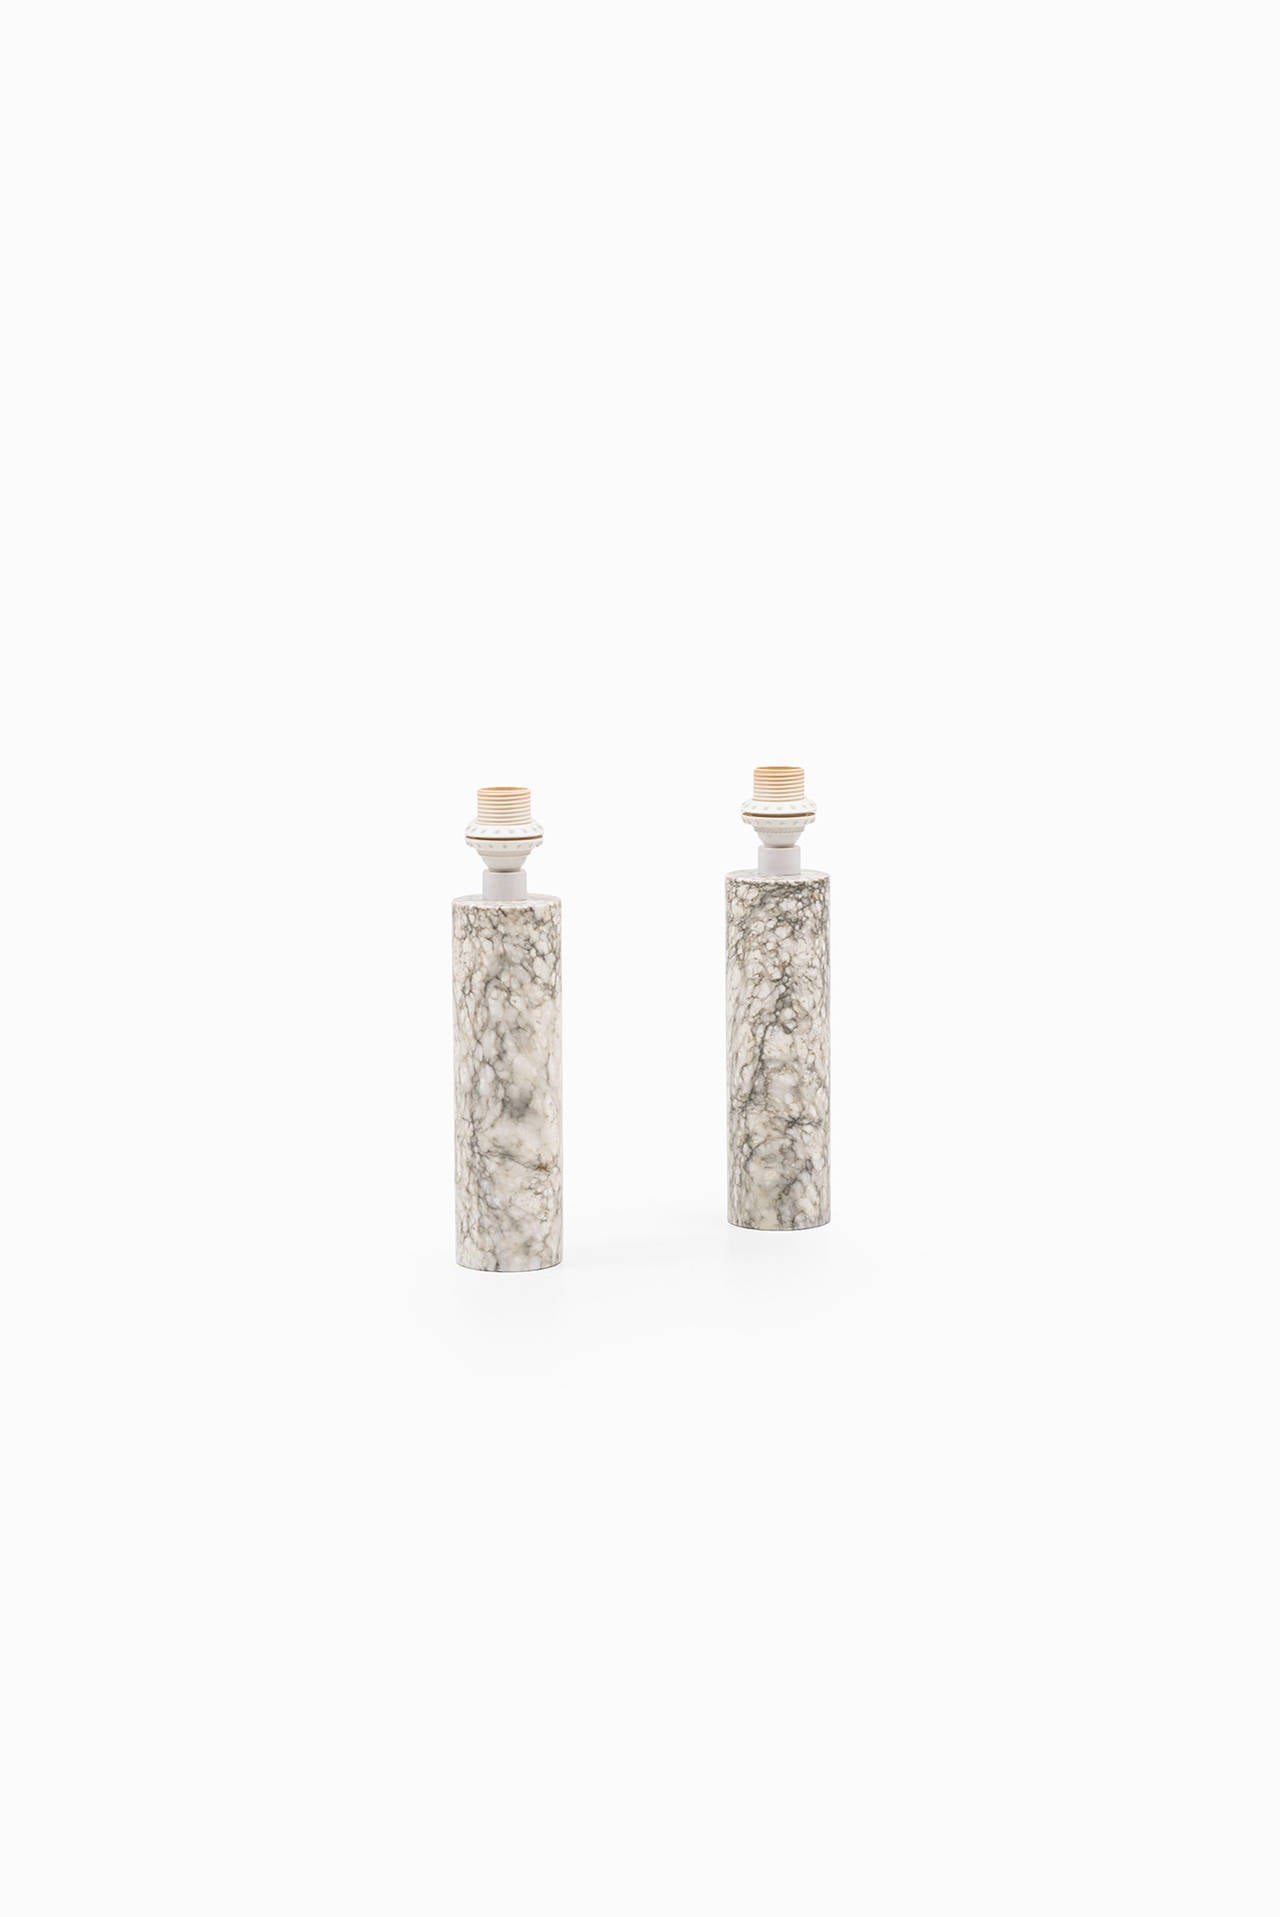 Mid-Century Modern Pair of Cylinder Table Lamps in Marble Produced in Italy